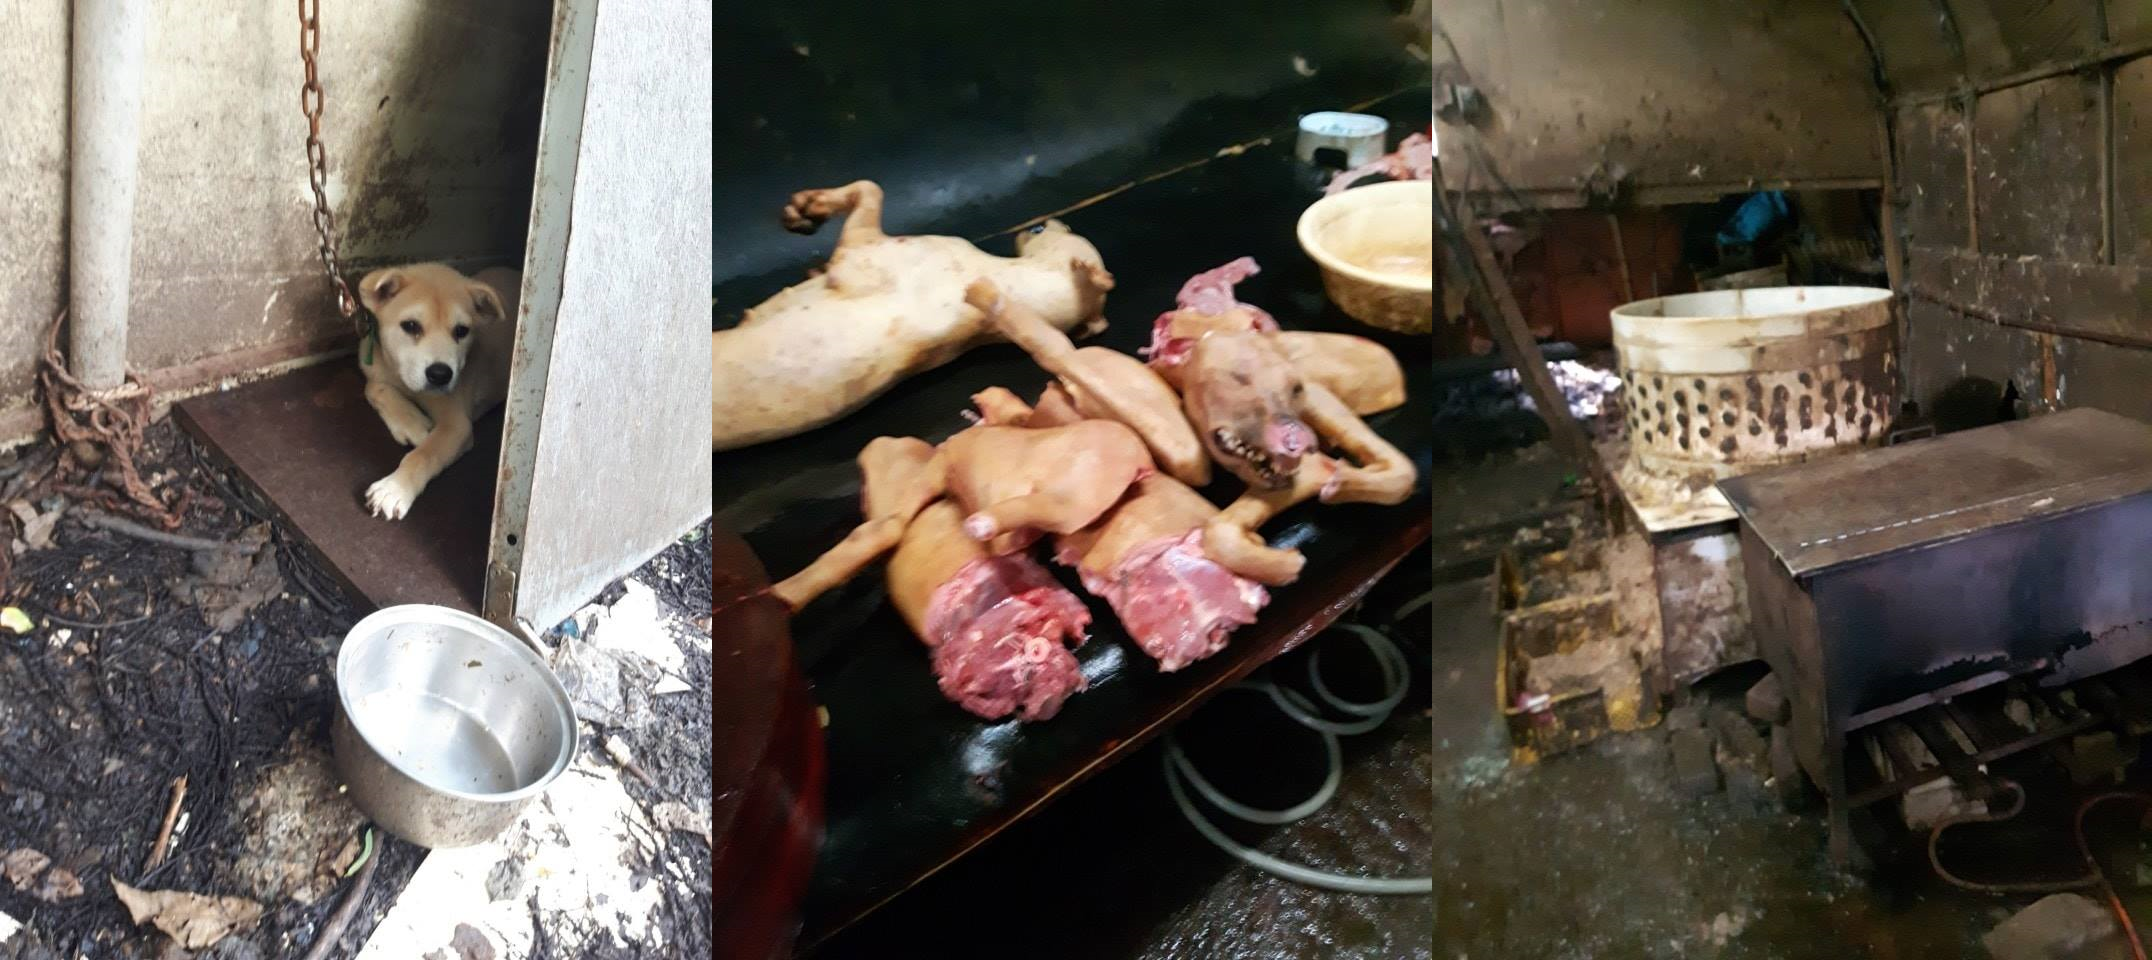 South Koreans: start taking responsibility for enforcing your own country’s laws: stop the illegal dog and cat meat trades.